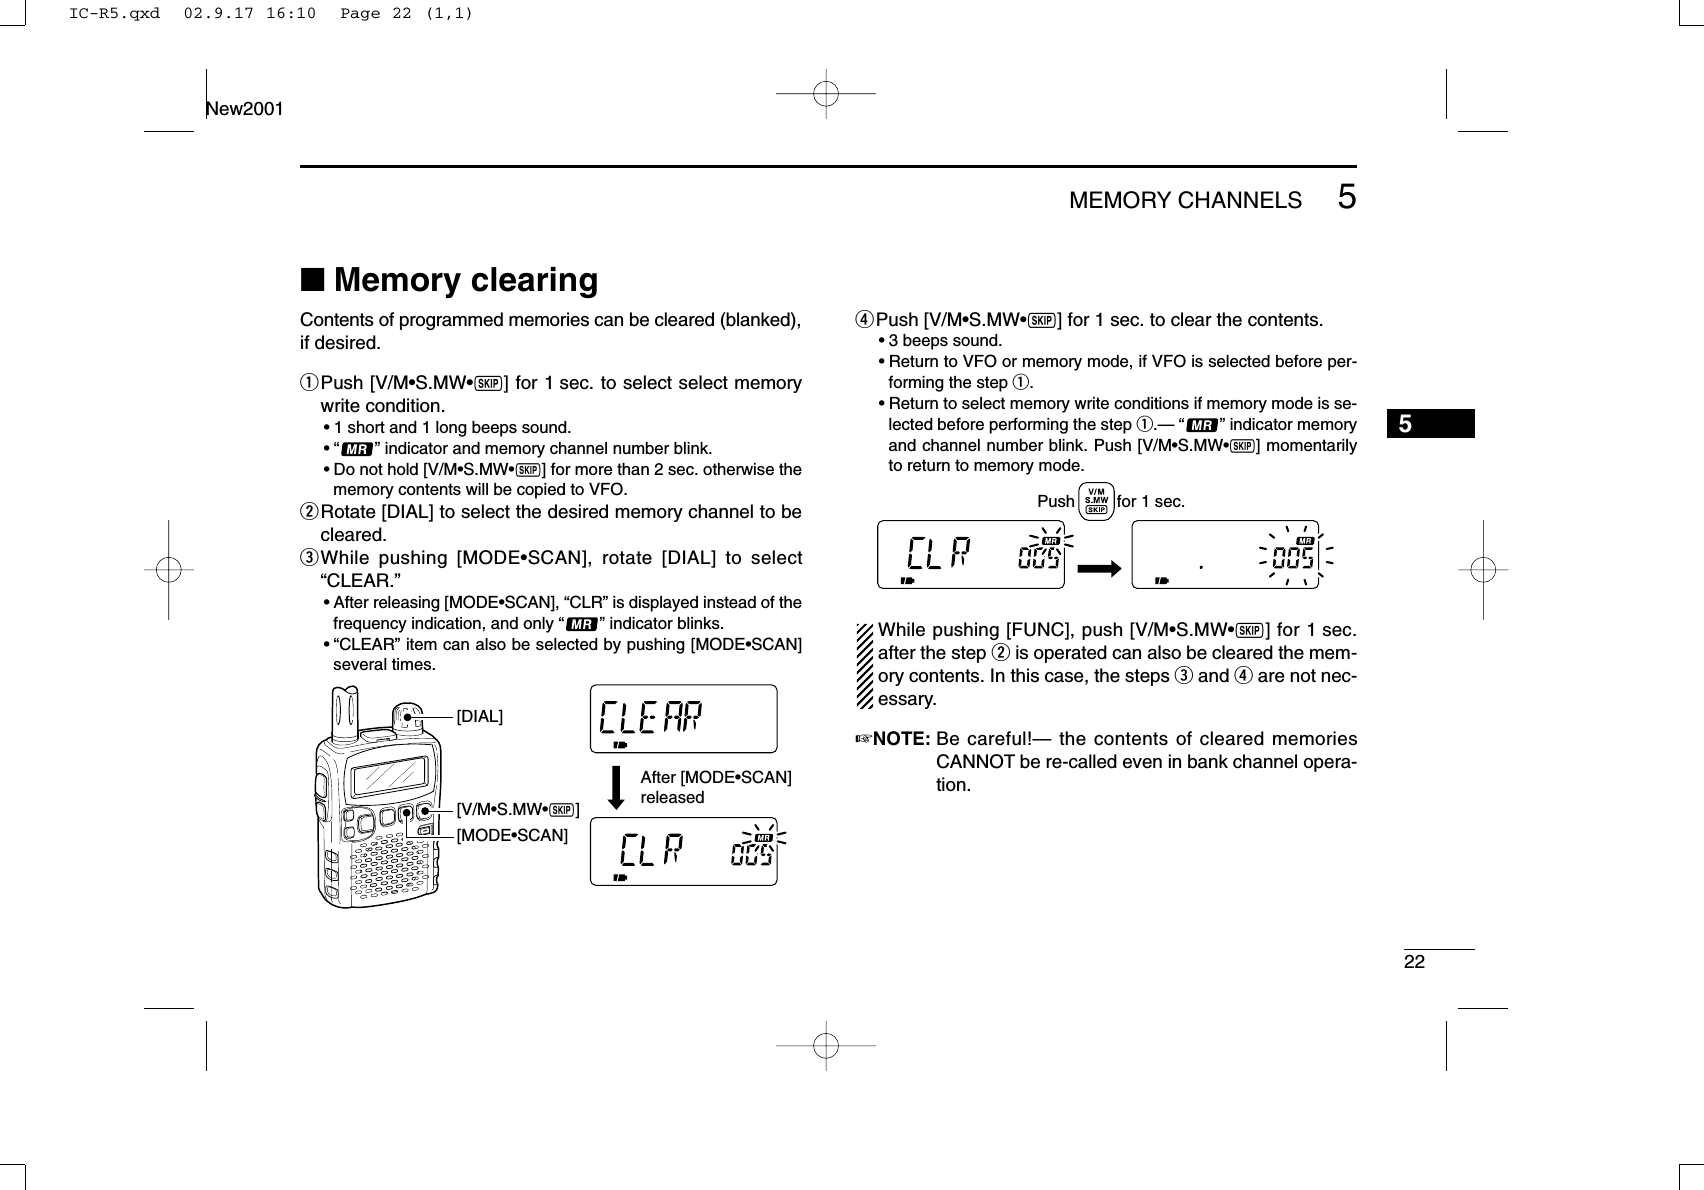 225MEMORY CHANNELSNew20015■Memory clearingContents of programmed memories can be cleared (blanked),if desired.qPush [V/M•S.MW•~] for 1 sec. to select select memorywrite condition.•1 short and 1 long beeps sound.•“ ” indicator and memory channel number blink.•Do not hold [V/M•S.MW•~] for more than 2 sec. otherwise thememory contents will be copied to VFO.wRotate [DIAL] to select the desired memory channel to becleared.eWhile pushing [MODE•SCAN], rotate [DIAL] to select“CLEAR.”•After releasing [MODE•SCAN], “CLR” is displayed instead of thefrequency indication, and only “” indicator blinks.•“CLEAR” item can also be selected by pushing [MODE•SCAN]several times.rPush [V/M•S.MW•~] for 1 sec. to clear the contents.•3 beeps sound.•Return to VFO or memory mode, if VFO is selected before per-forming the step q.•Return to select memory write conditions if memory mode is se-lected before performing the step q.— “” indicator memoryand channel number blink. Push [V/M•S.MW•~] momentarilyto return to memory mode.While pushing [FUNC], push [V/M•S.MW•~] for 1 sec.after the step wis operated can also be cleared the mem-ory contents. In this case, the steps eand rare not nec-essary.☞NOTE: Be careful!— the contents of cleared memoriesCANNOT be re-called even in bank channel opera-tion.Push         for 1 sec.[V/M•S.MW•~][MODE•SCAN][DIAL]After [MODE•SCAN] releasedIC-R5.qxd  02.9.17 16:10  Page 22 (1,1)